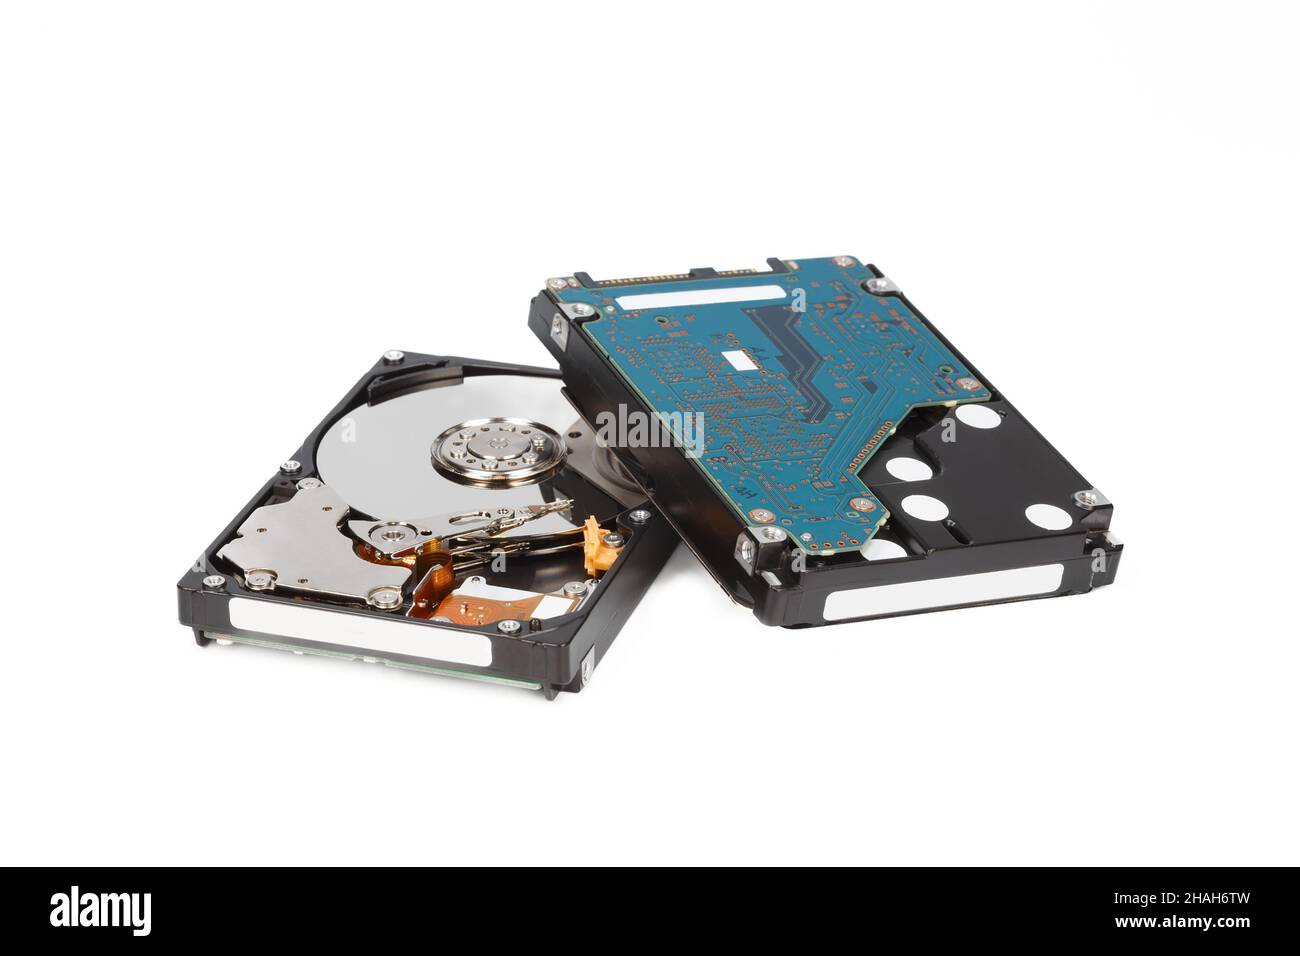 Two hard drives, front and back sides, on a white background close-up Stock Photo